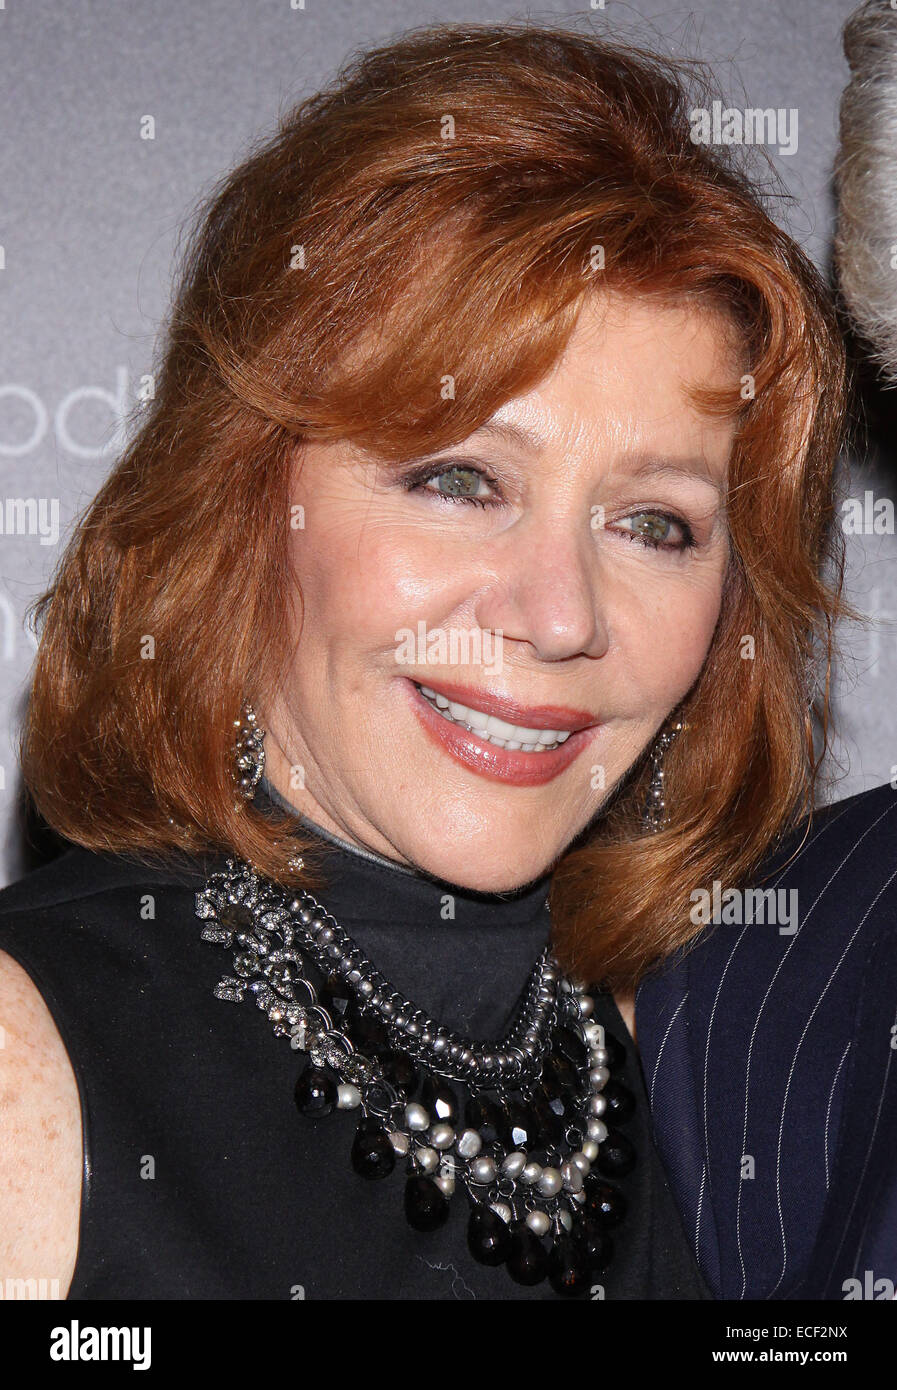 Jersey Boys New York Special Screening held at the Paris Theatre - Arrivals.  Featuring: Joy Philbin Where: New York, New York, United States When: 10 Jun 2014 Stock Photo